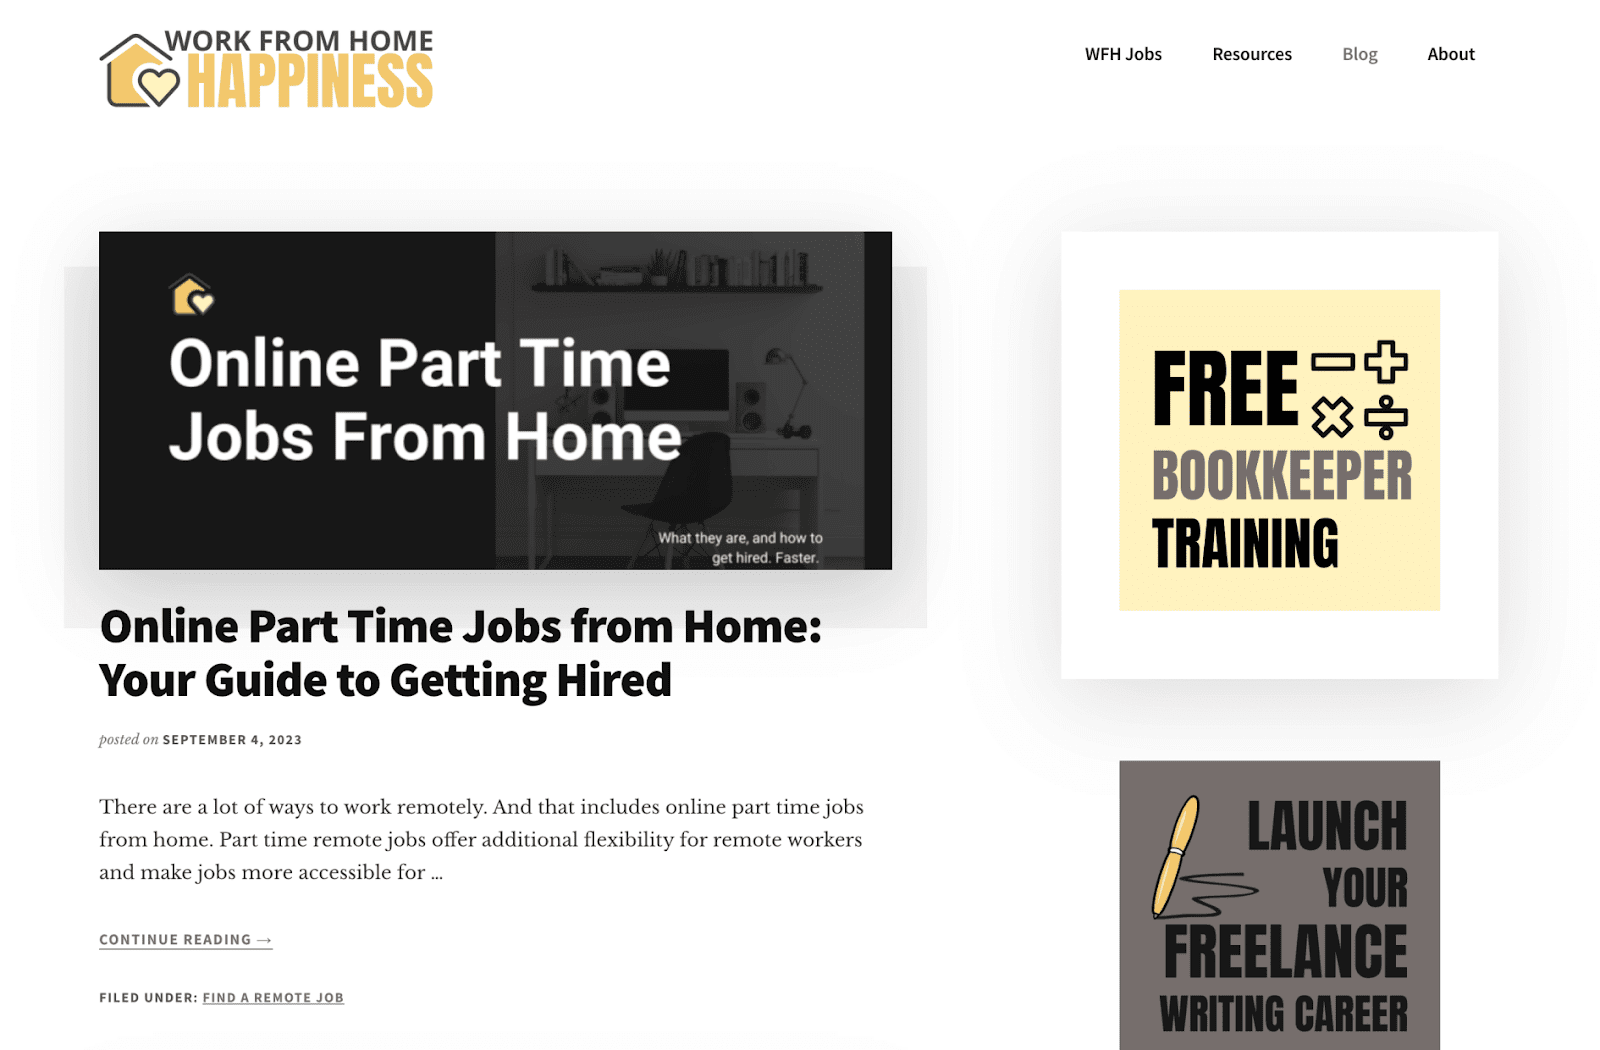 A screenshot of the Work From Home Happiness blog